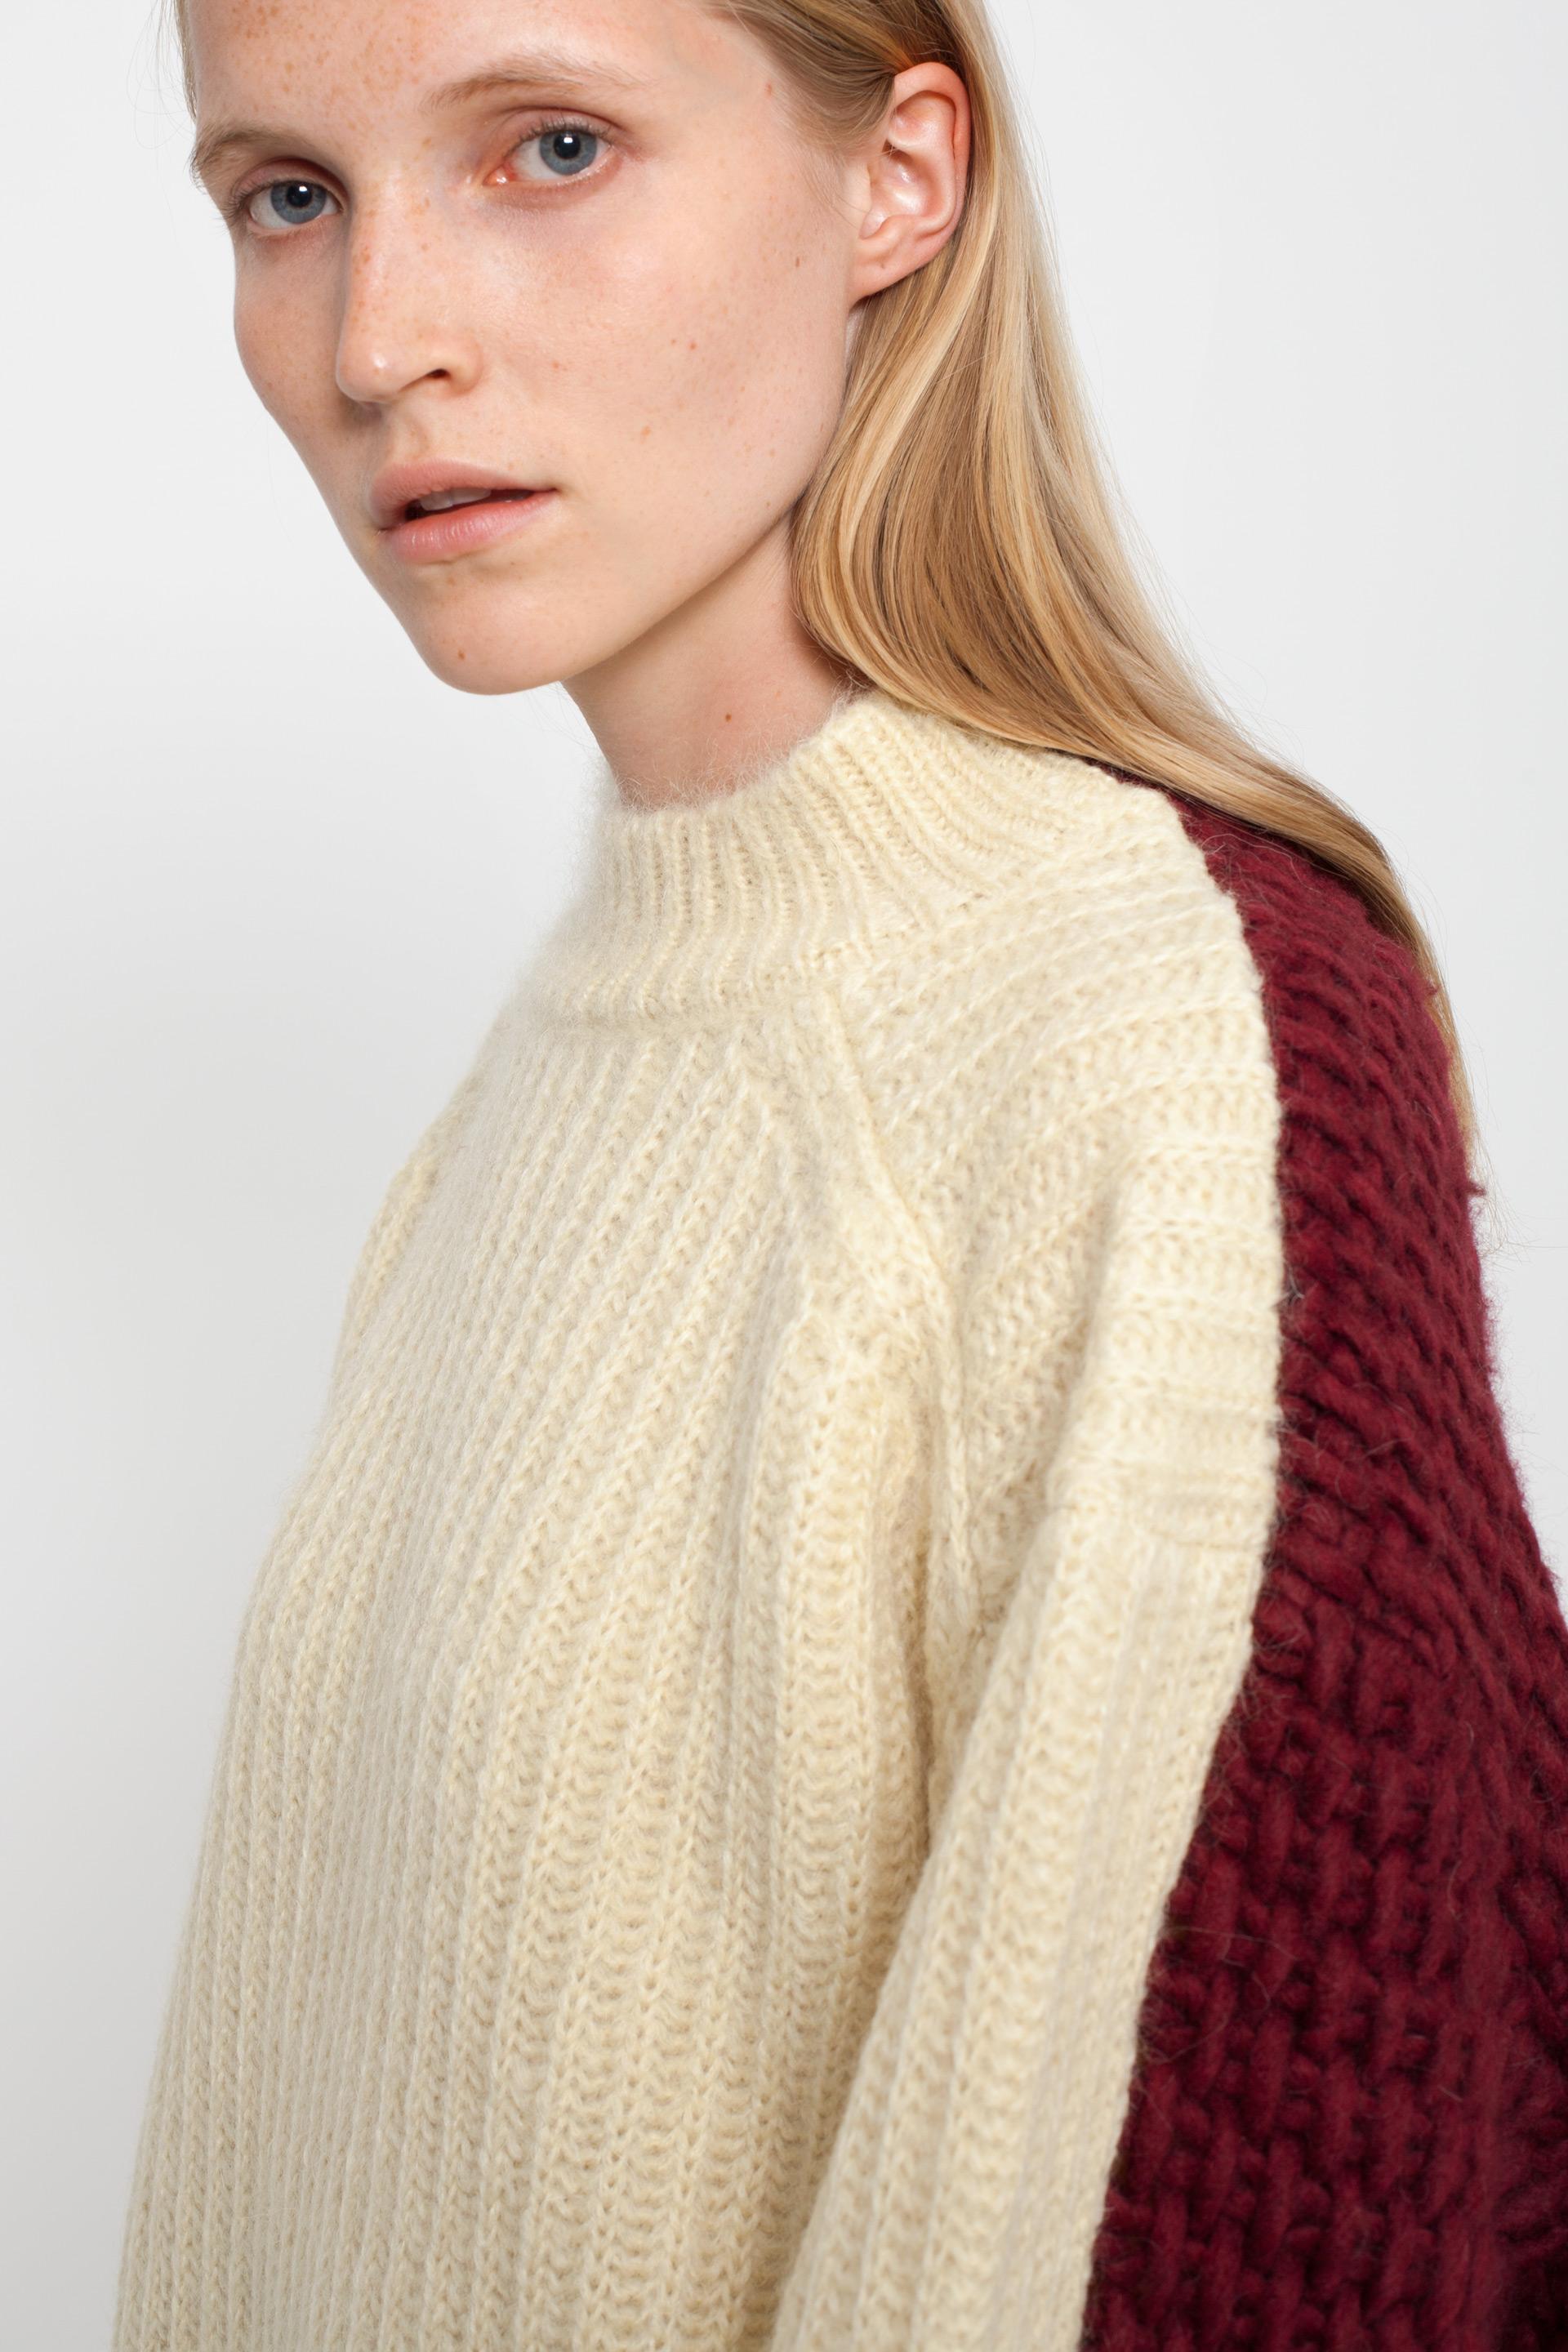 CALVIN KLEIN 205W39NYC Synthetic Knitted Sweater in Beige (Natural) - Lyst